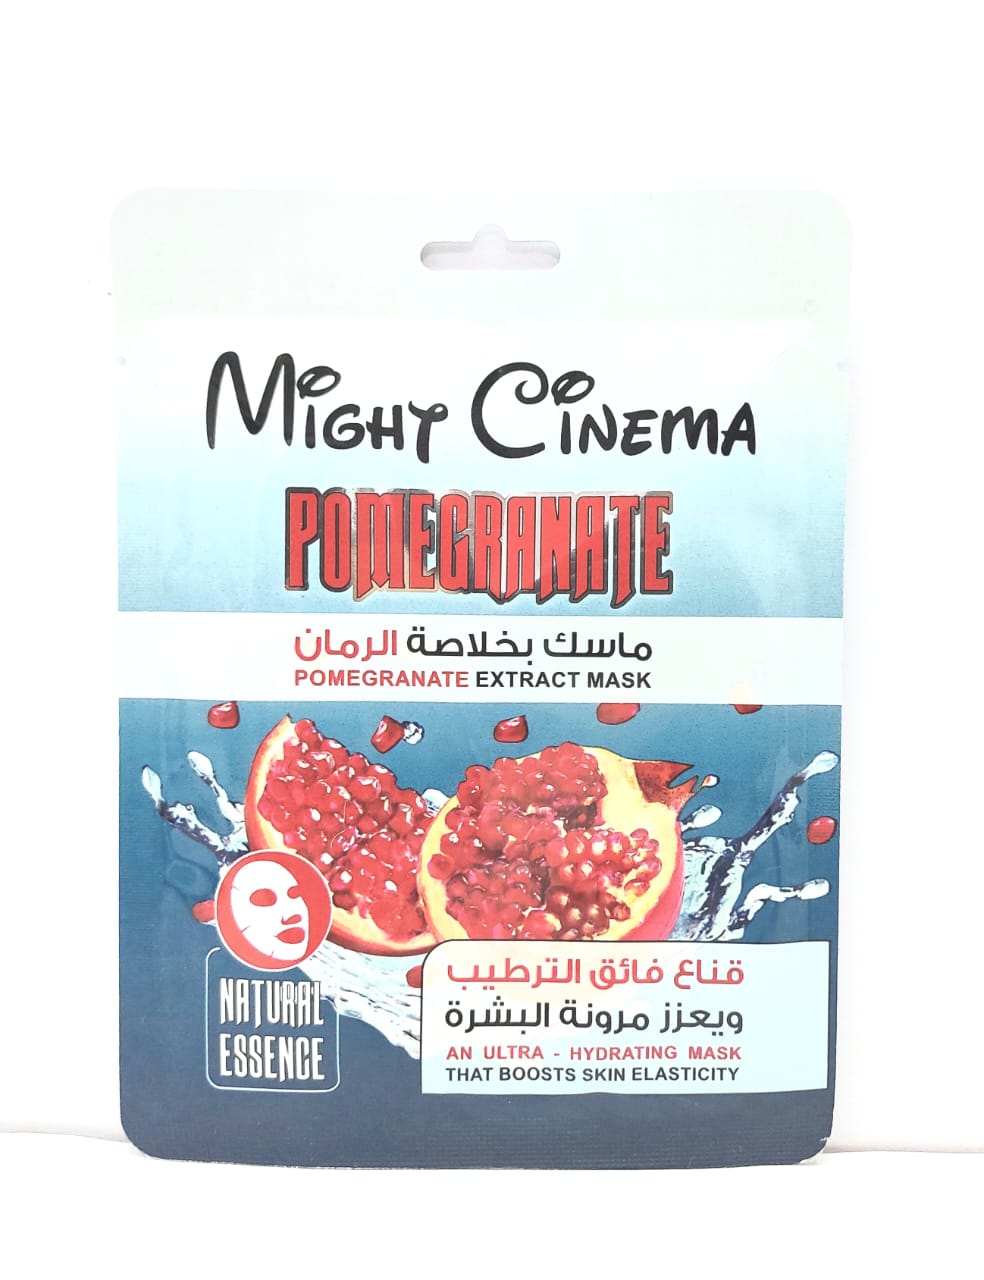 Pomegranate Extract Mask by Might Cinema .